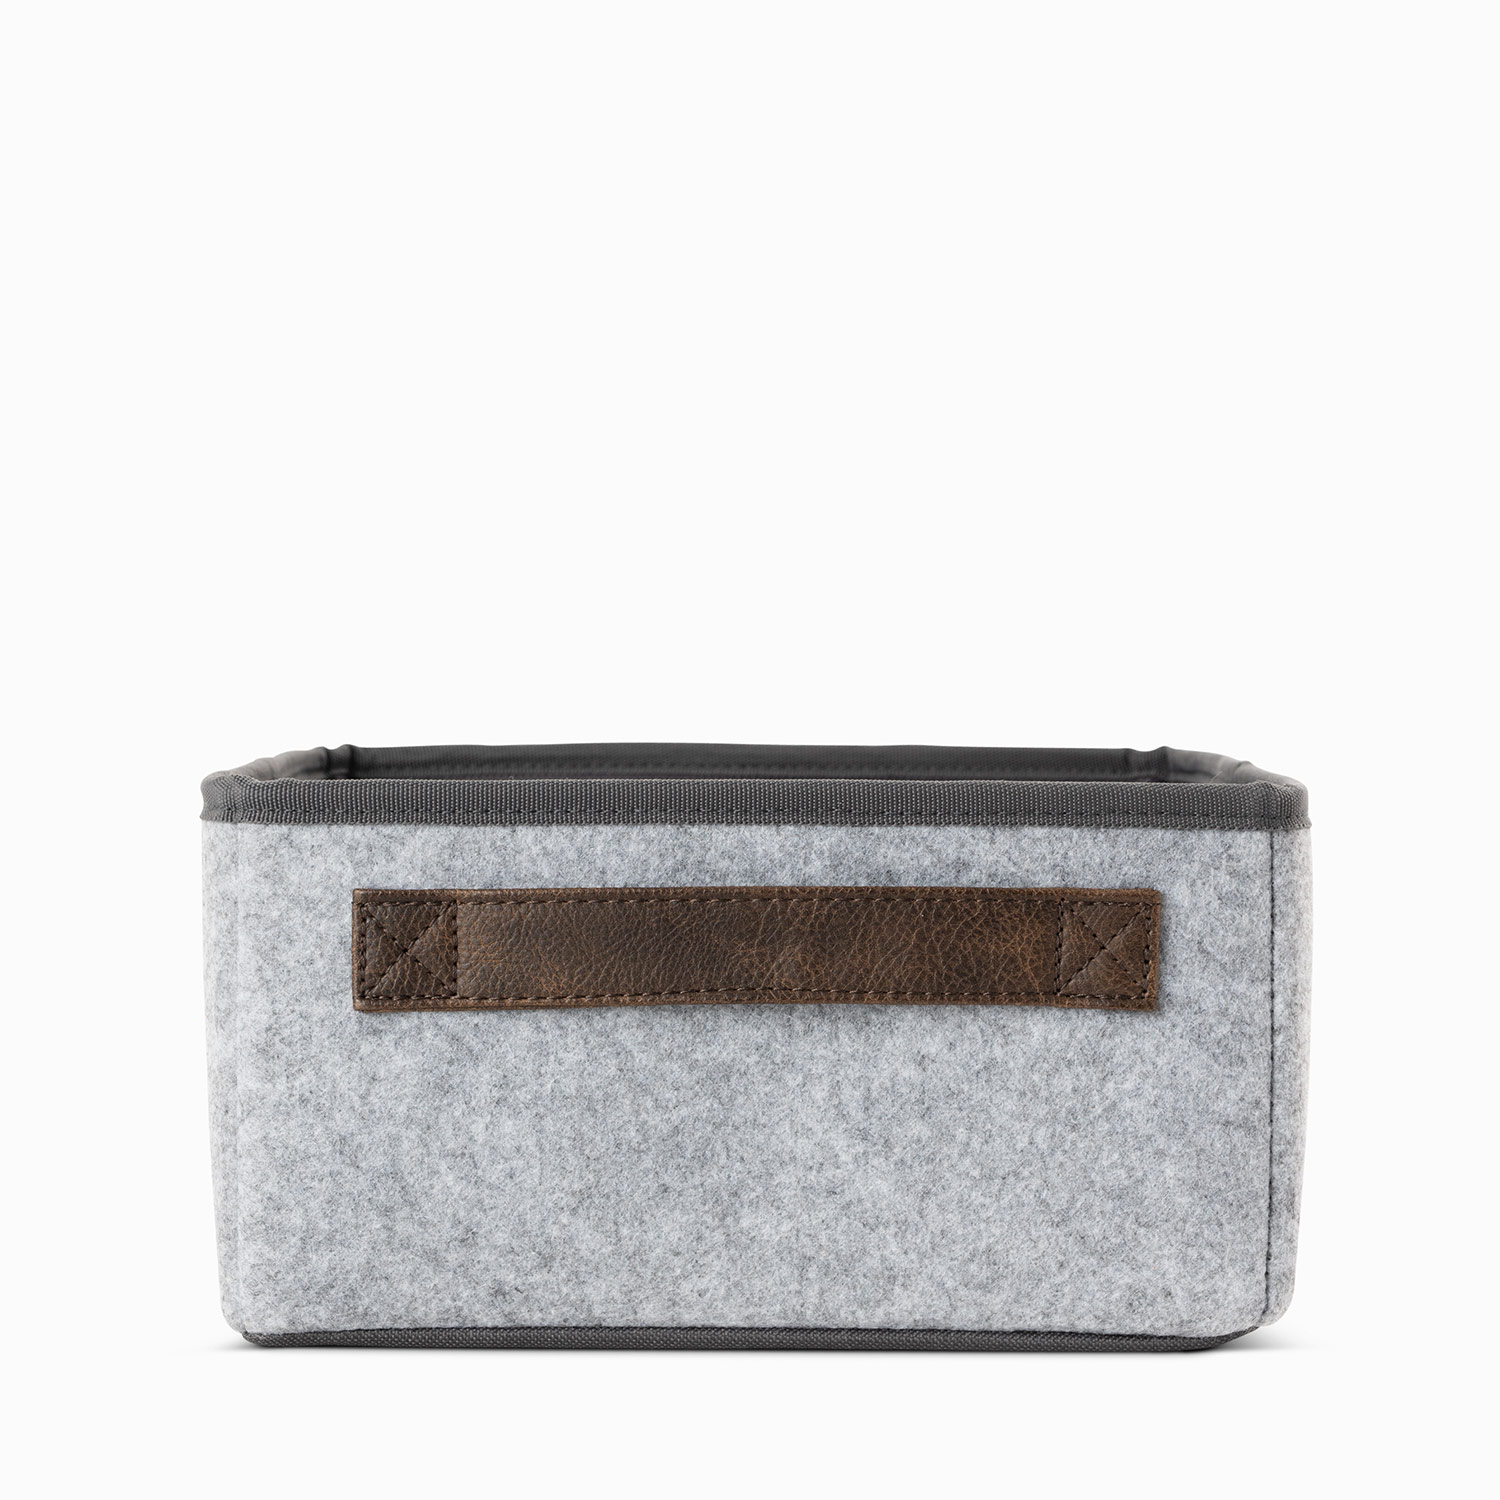 Brushed Whisper Grey - Your Way ® Storage Bin - Thirty-One Gifts -  Affordable Purses, Totes & Bags